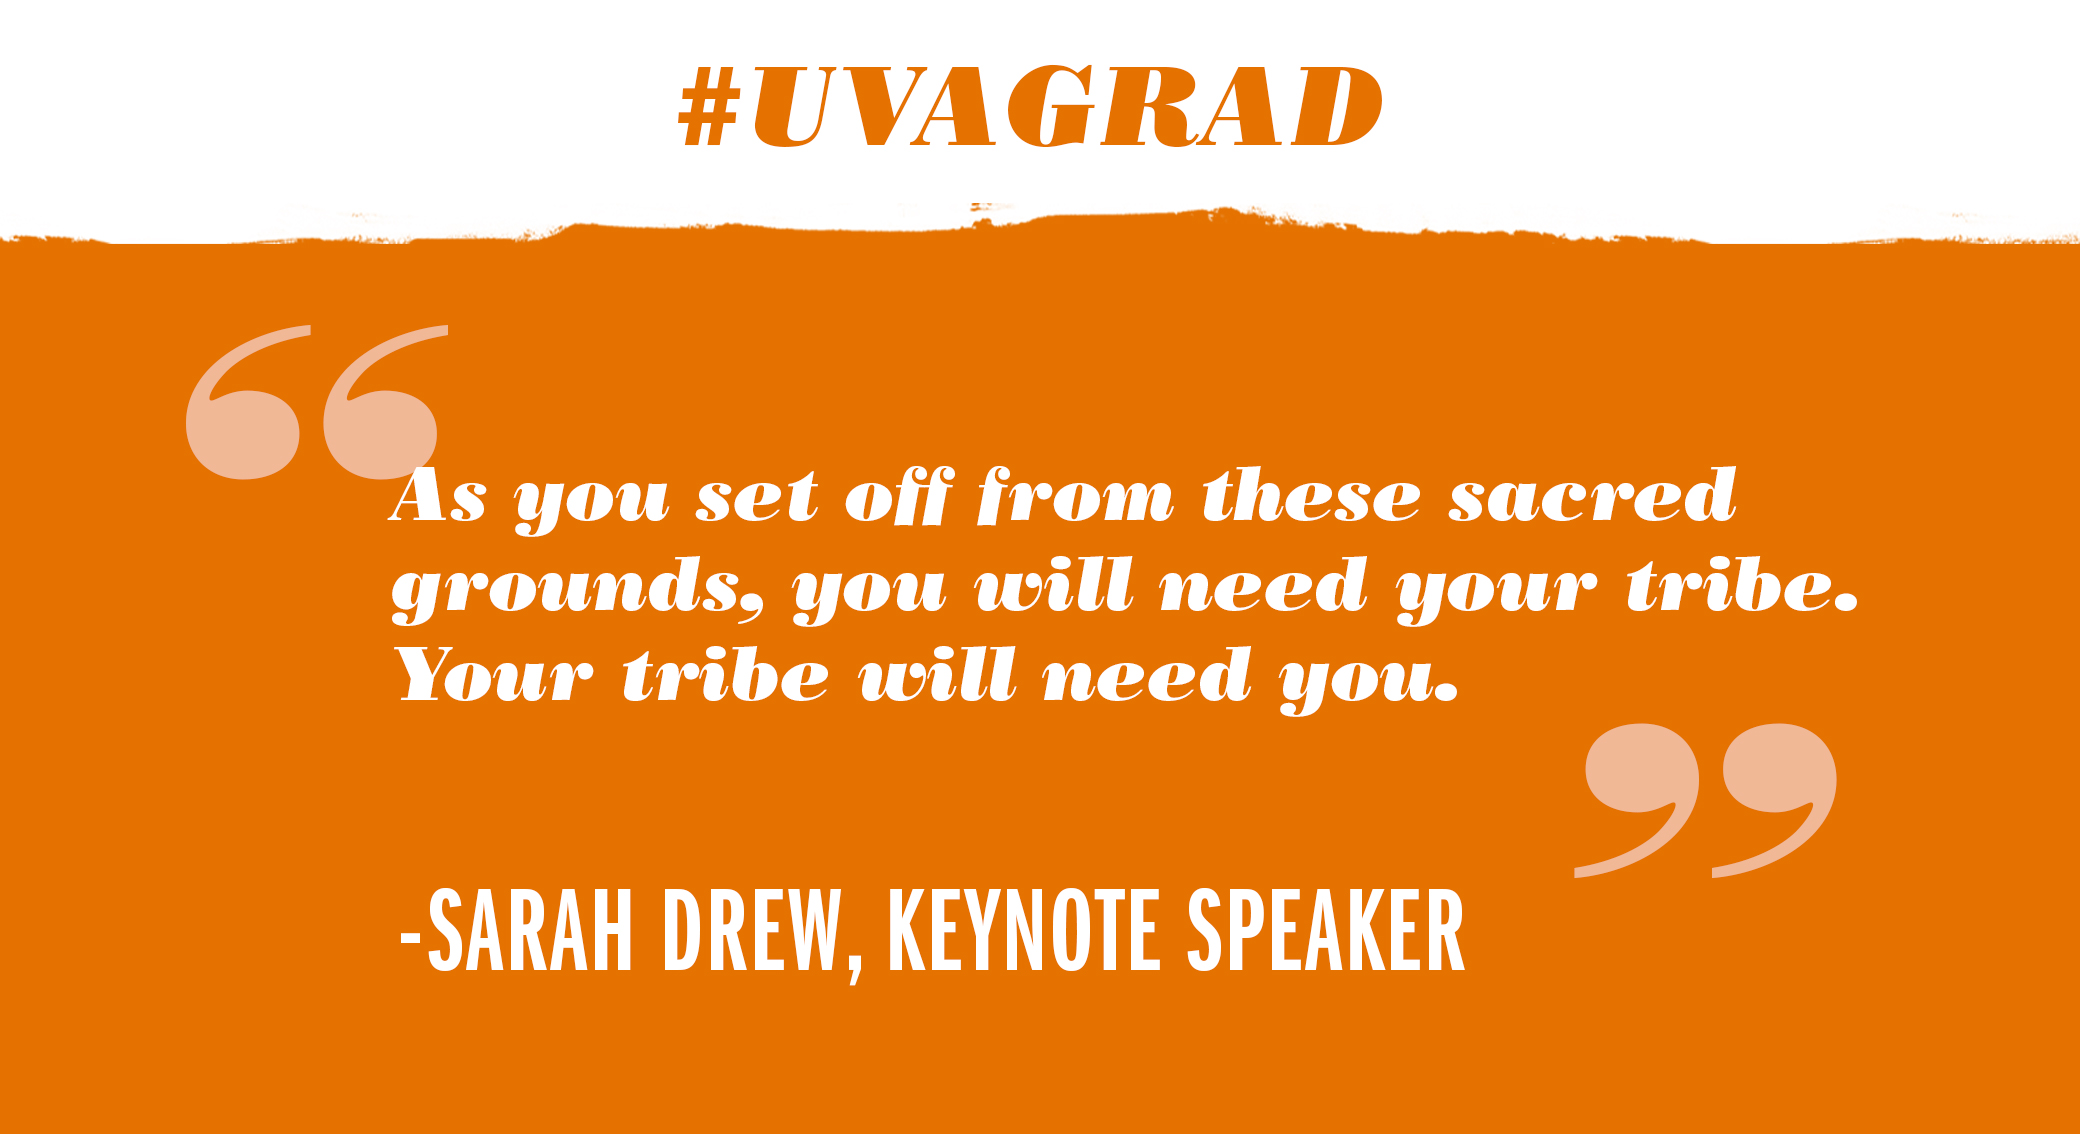 Text reads: #UVAGrad as you set off from these sacred grounds, you will need your tribe.  Your tribe will need you. Sarah Drew, keynote speaker